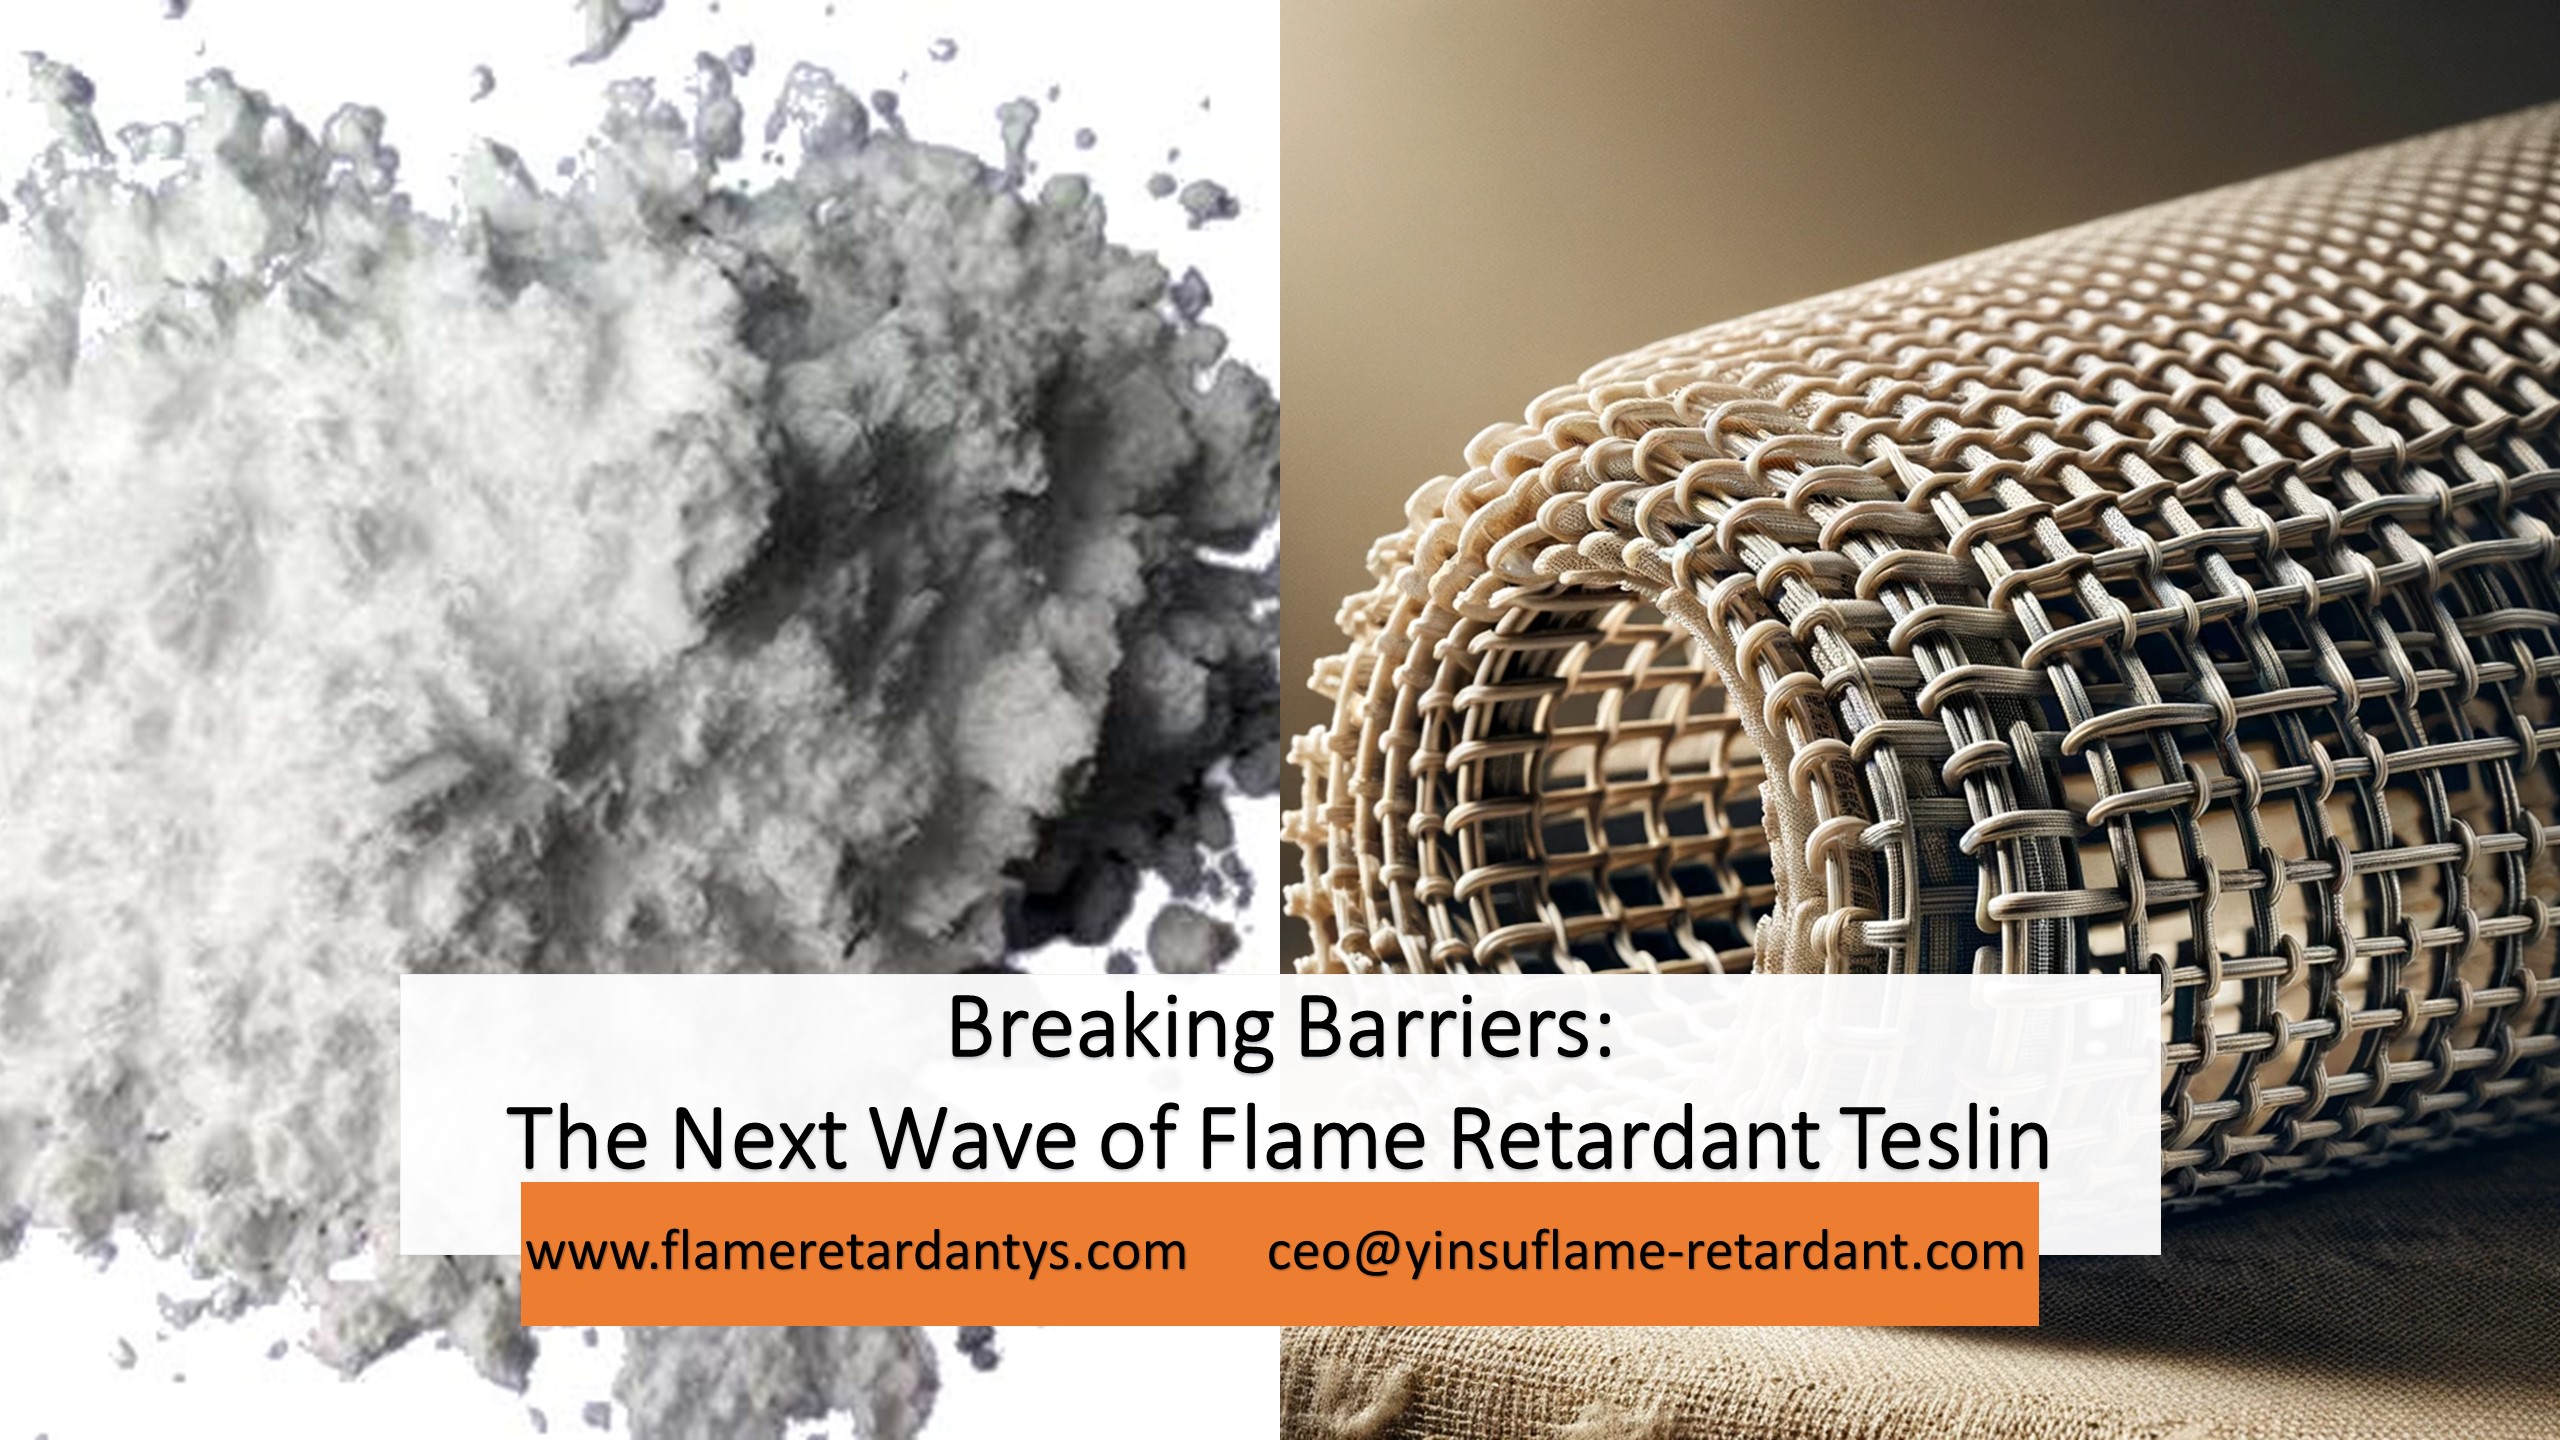 Breaking Barriers: The Next Wave of Flame Retardant Teslin